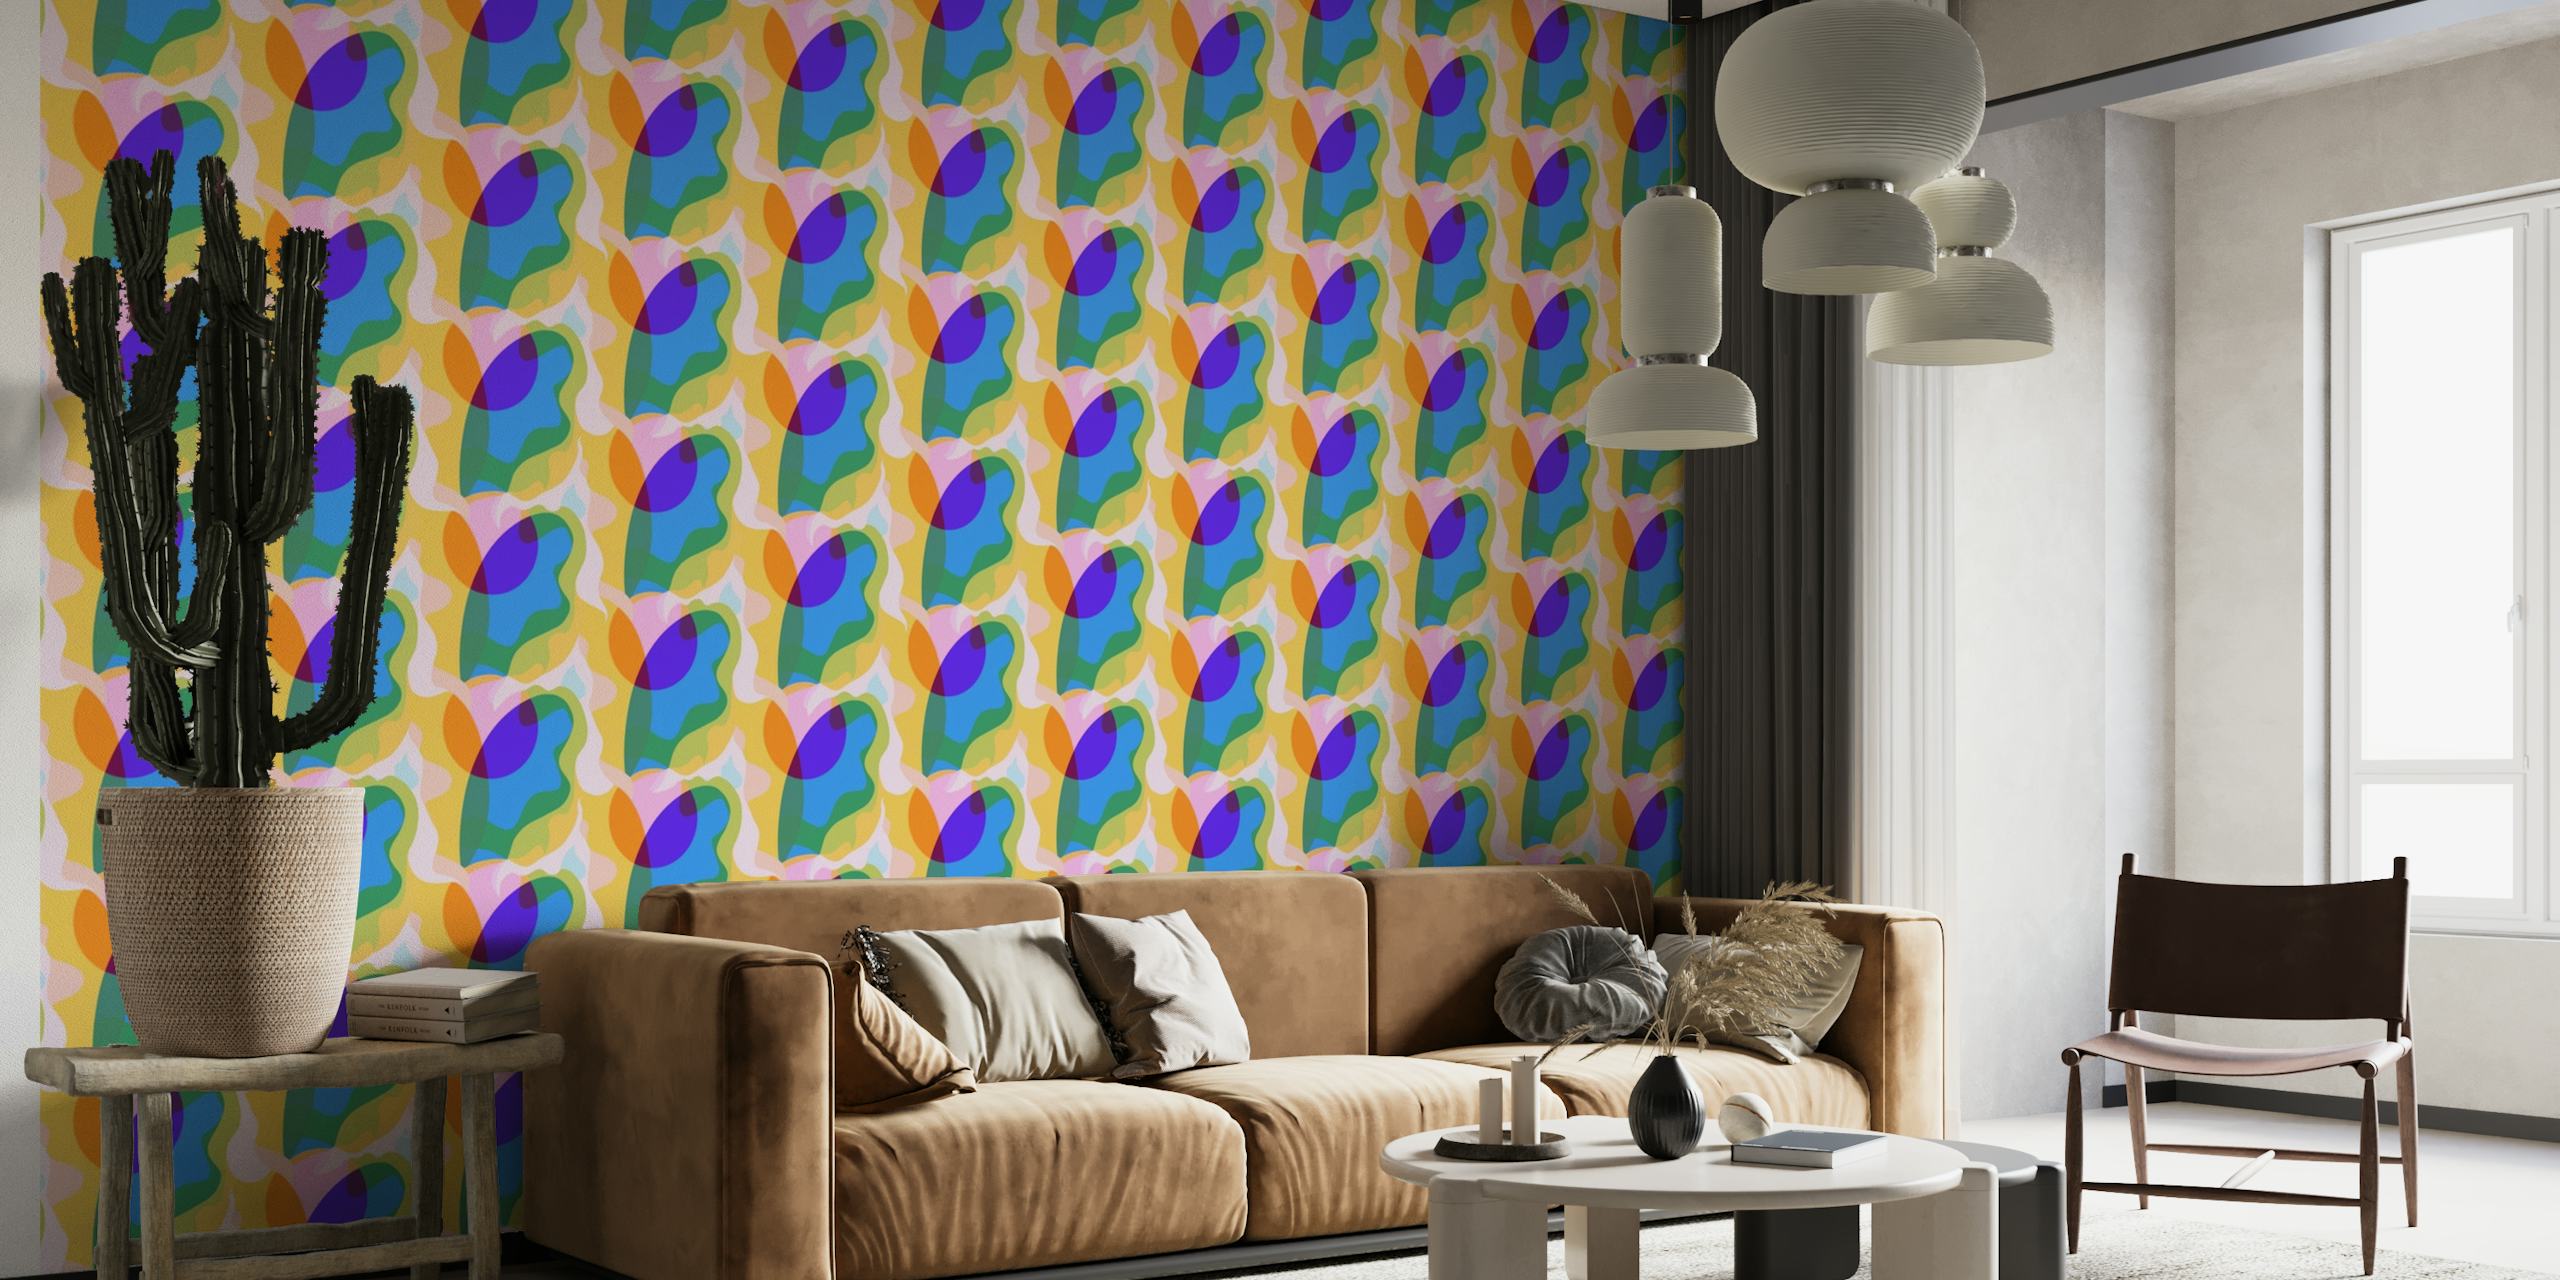 Saturated Shapes Pattern wallpaper